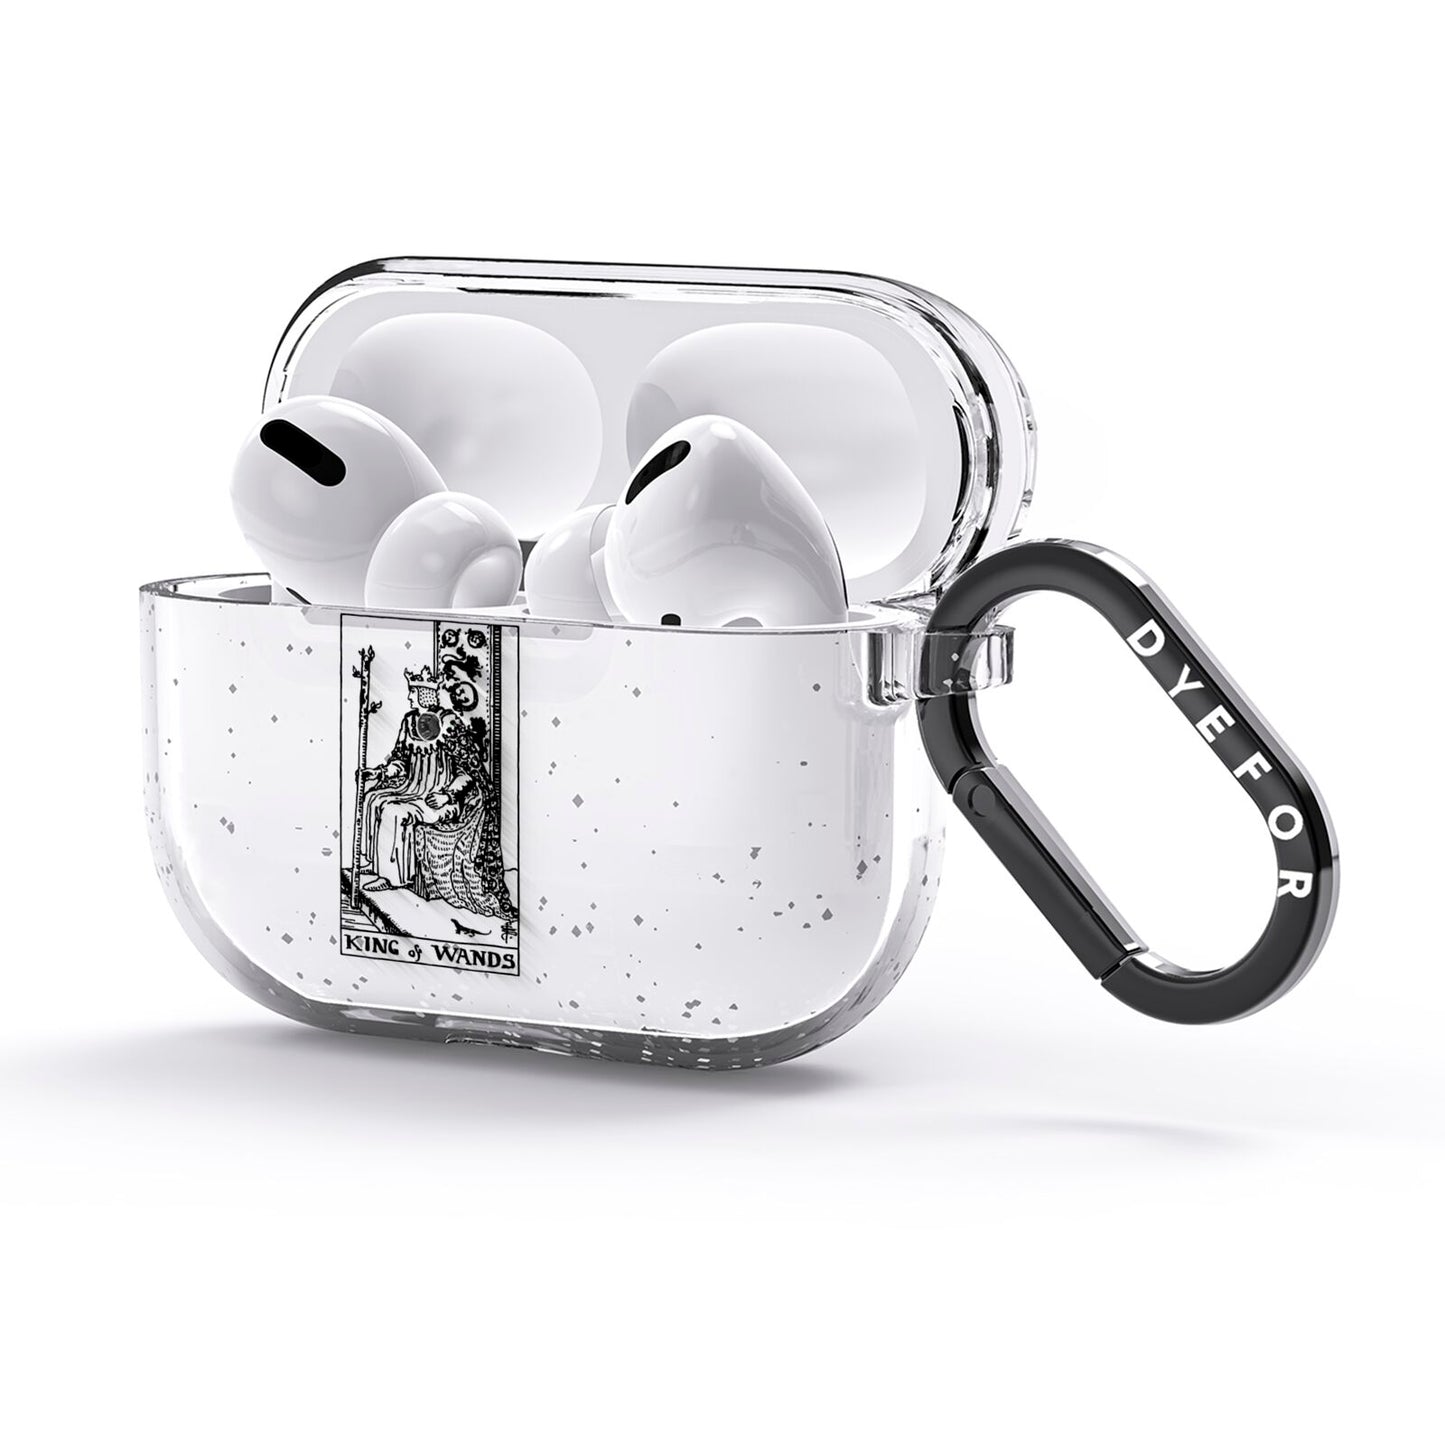 King of Wands Monochrome AirPods Glitter Case 3rd Gen Side Image